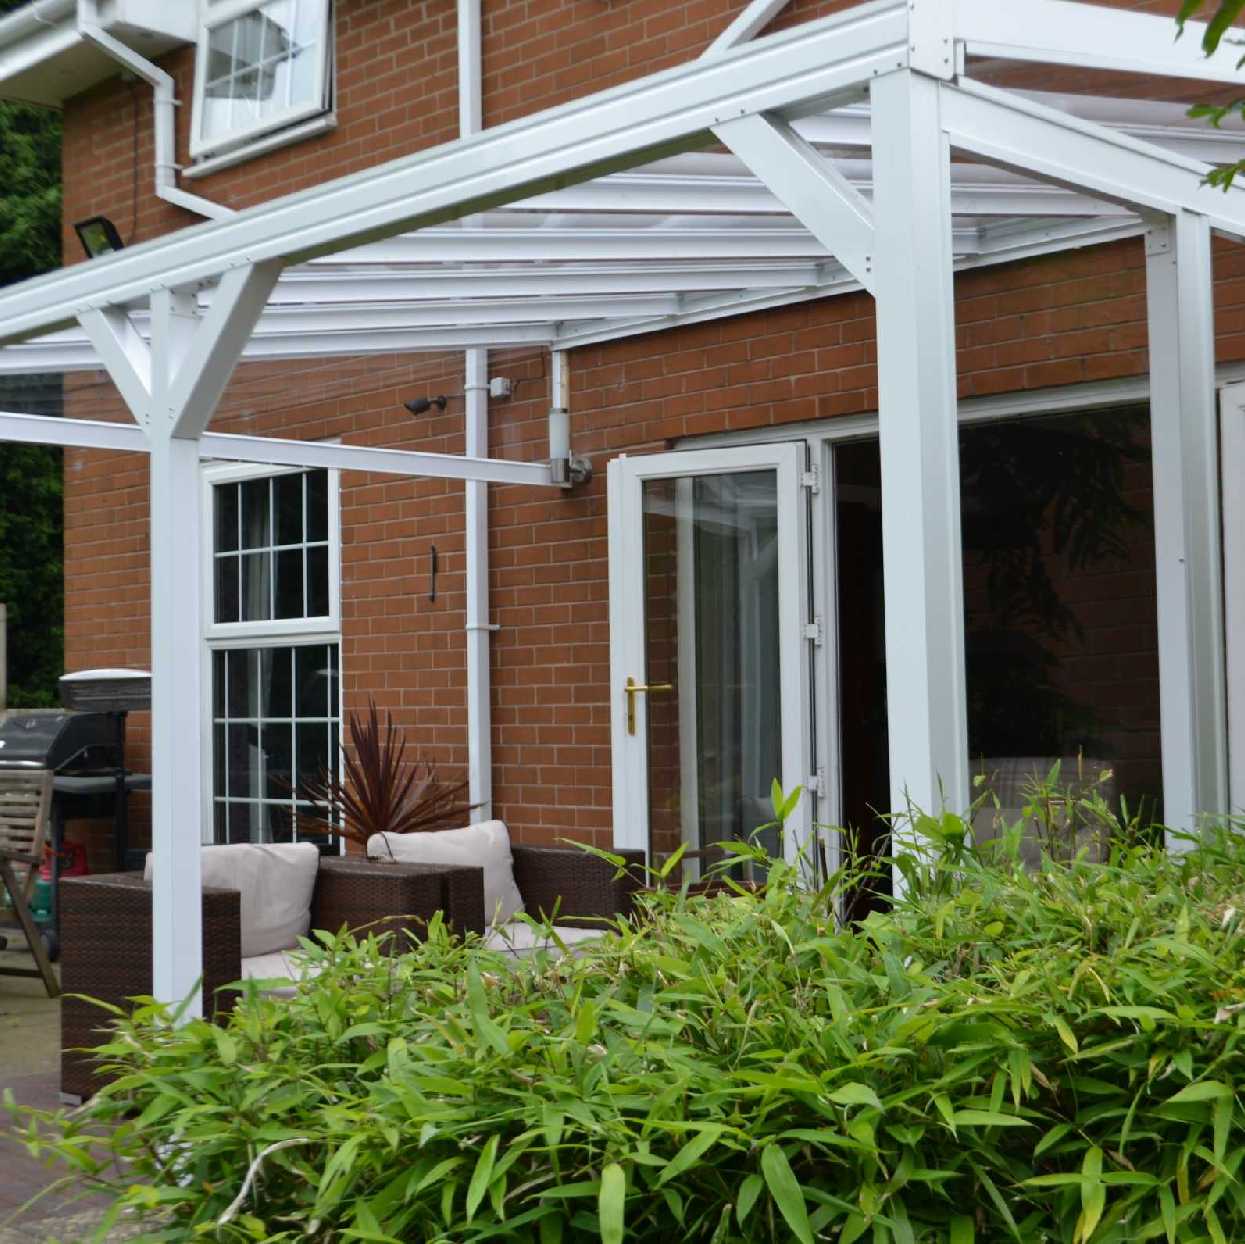 Omega Smart Lean-To Canopy, White UNGLAZED for 6mm Glazing - 5.6m (W) x 2.5m (P), (3) Supporting Posts from Omega Build